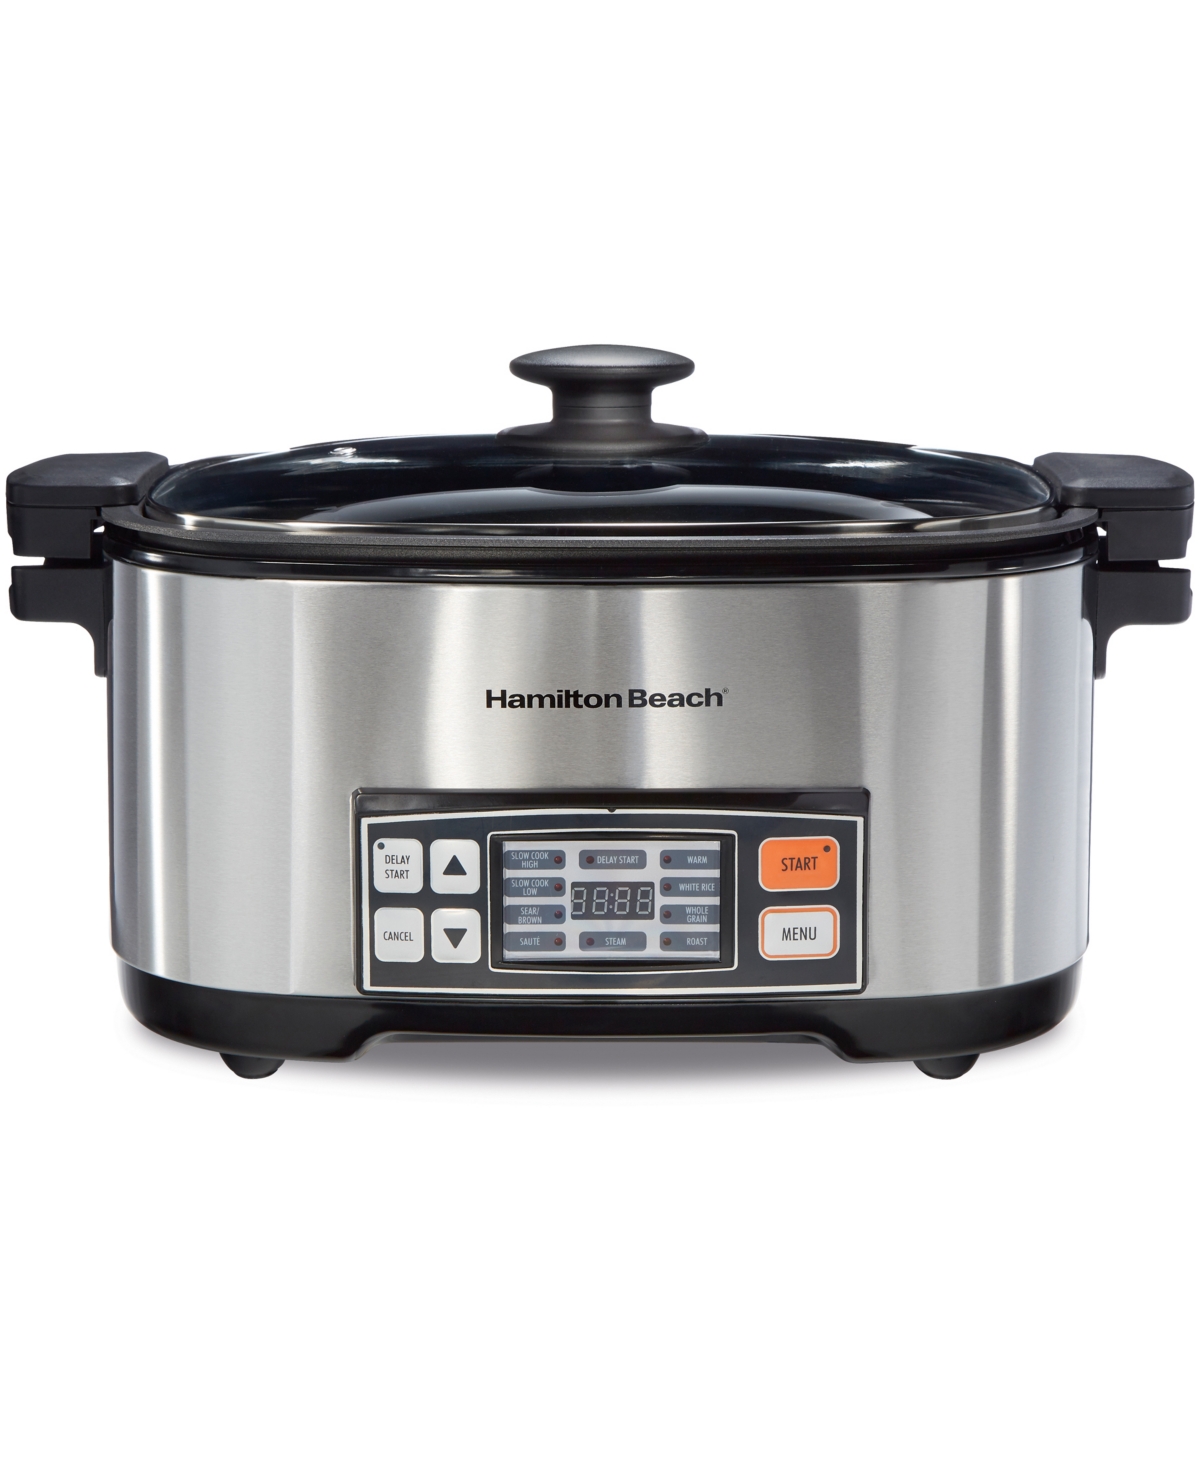 6-Qt. Multi-Cooker - Stainless Steel